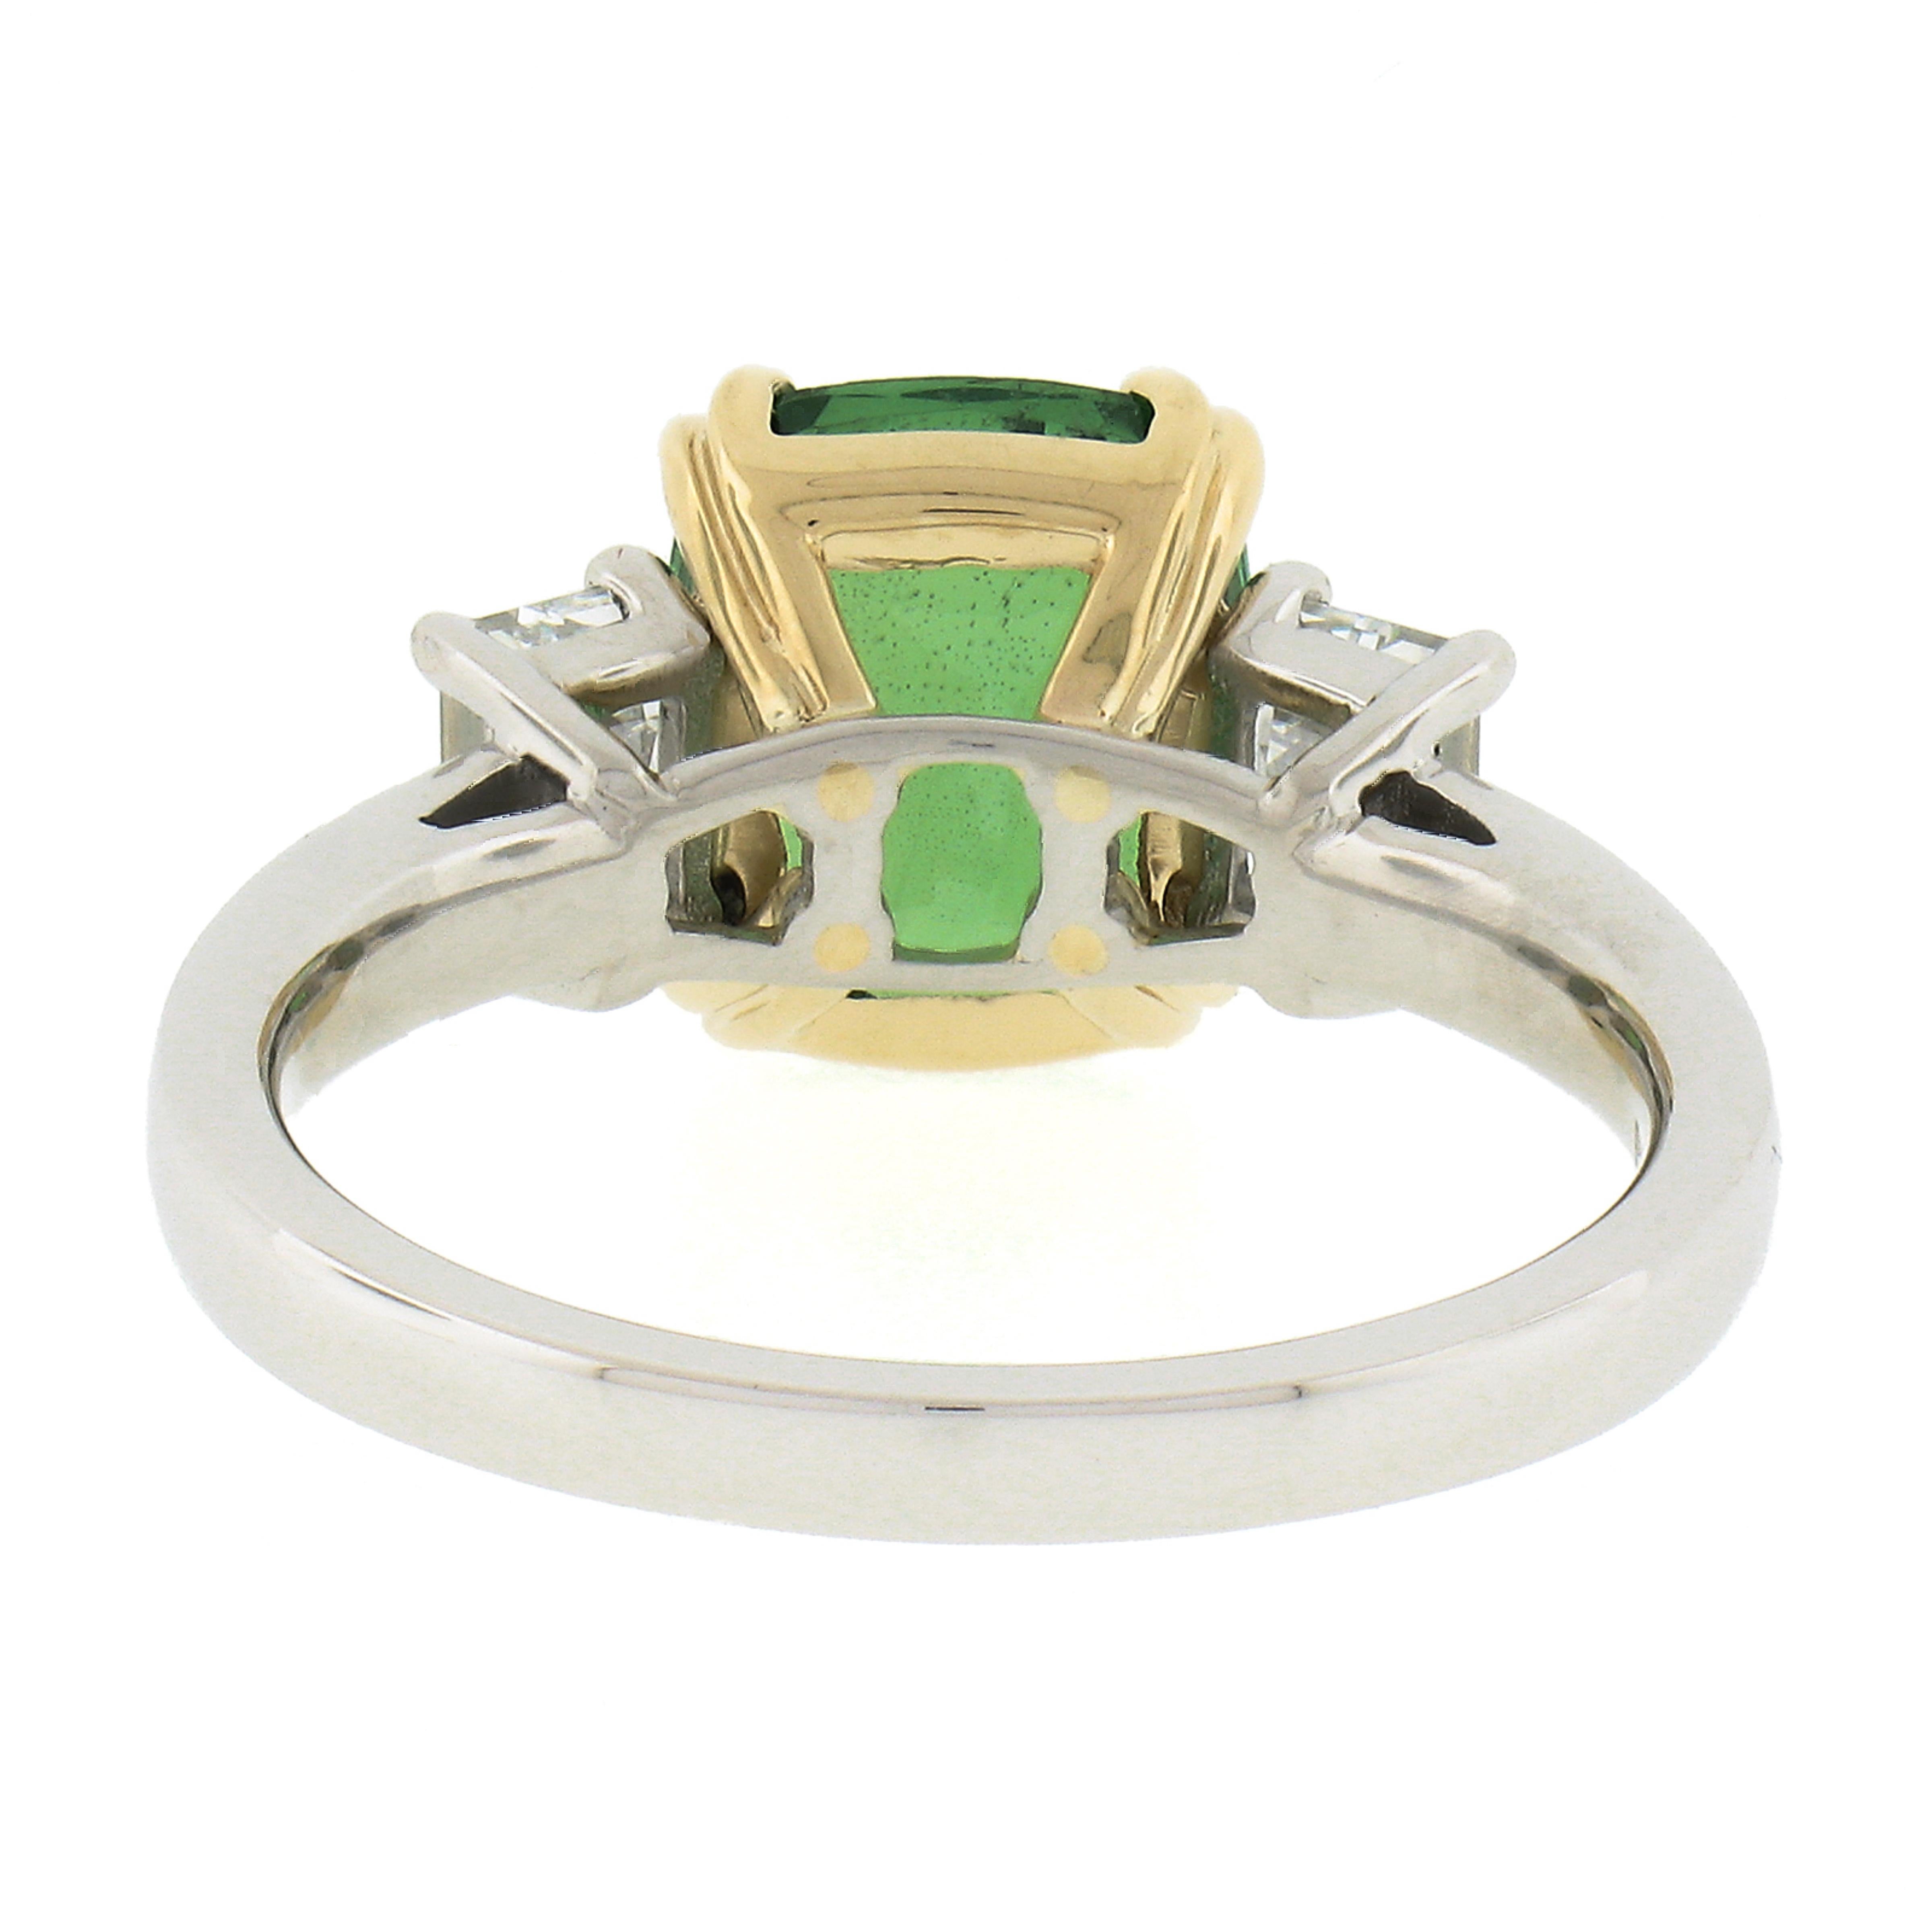 New Platinum & 14K Gold 4.39ctw GIA Cushion Tsavorite & Emerald Cut Diamond Ring In New Condition For Sale In Montclair, NJ